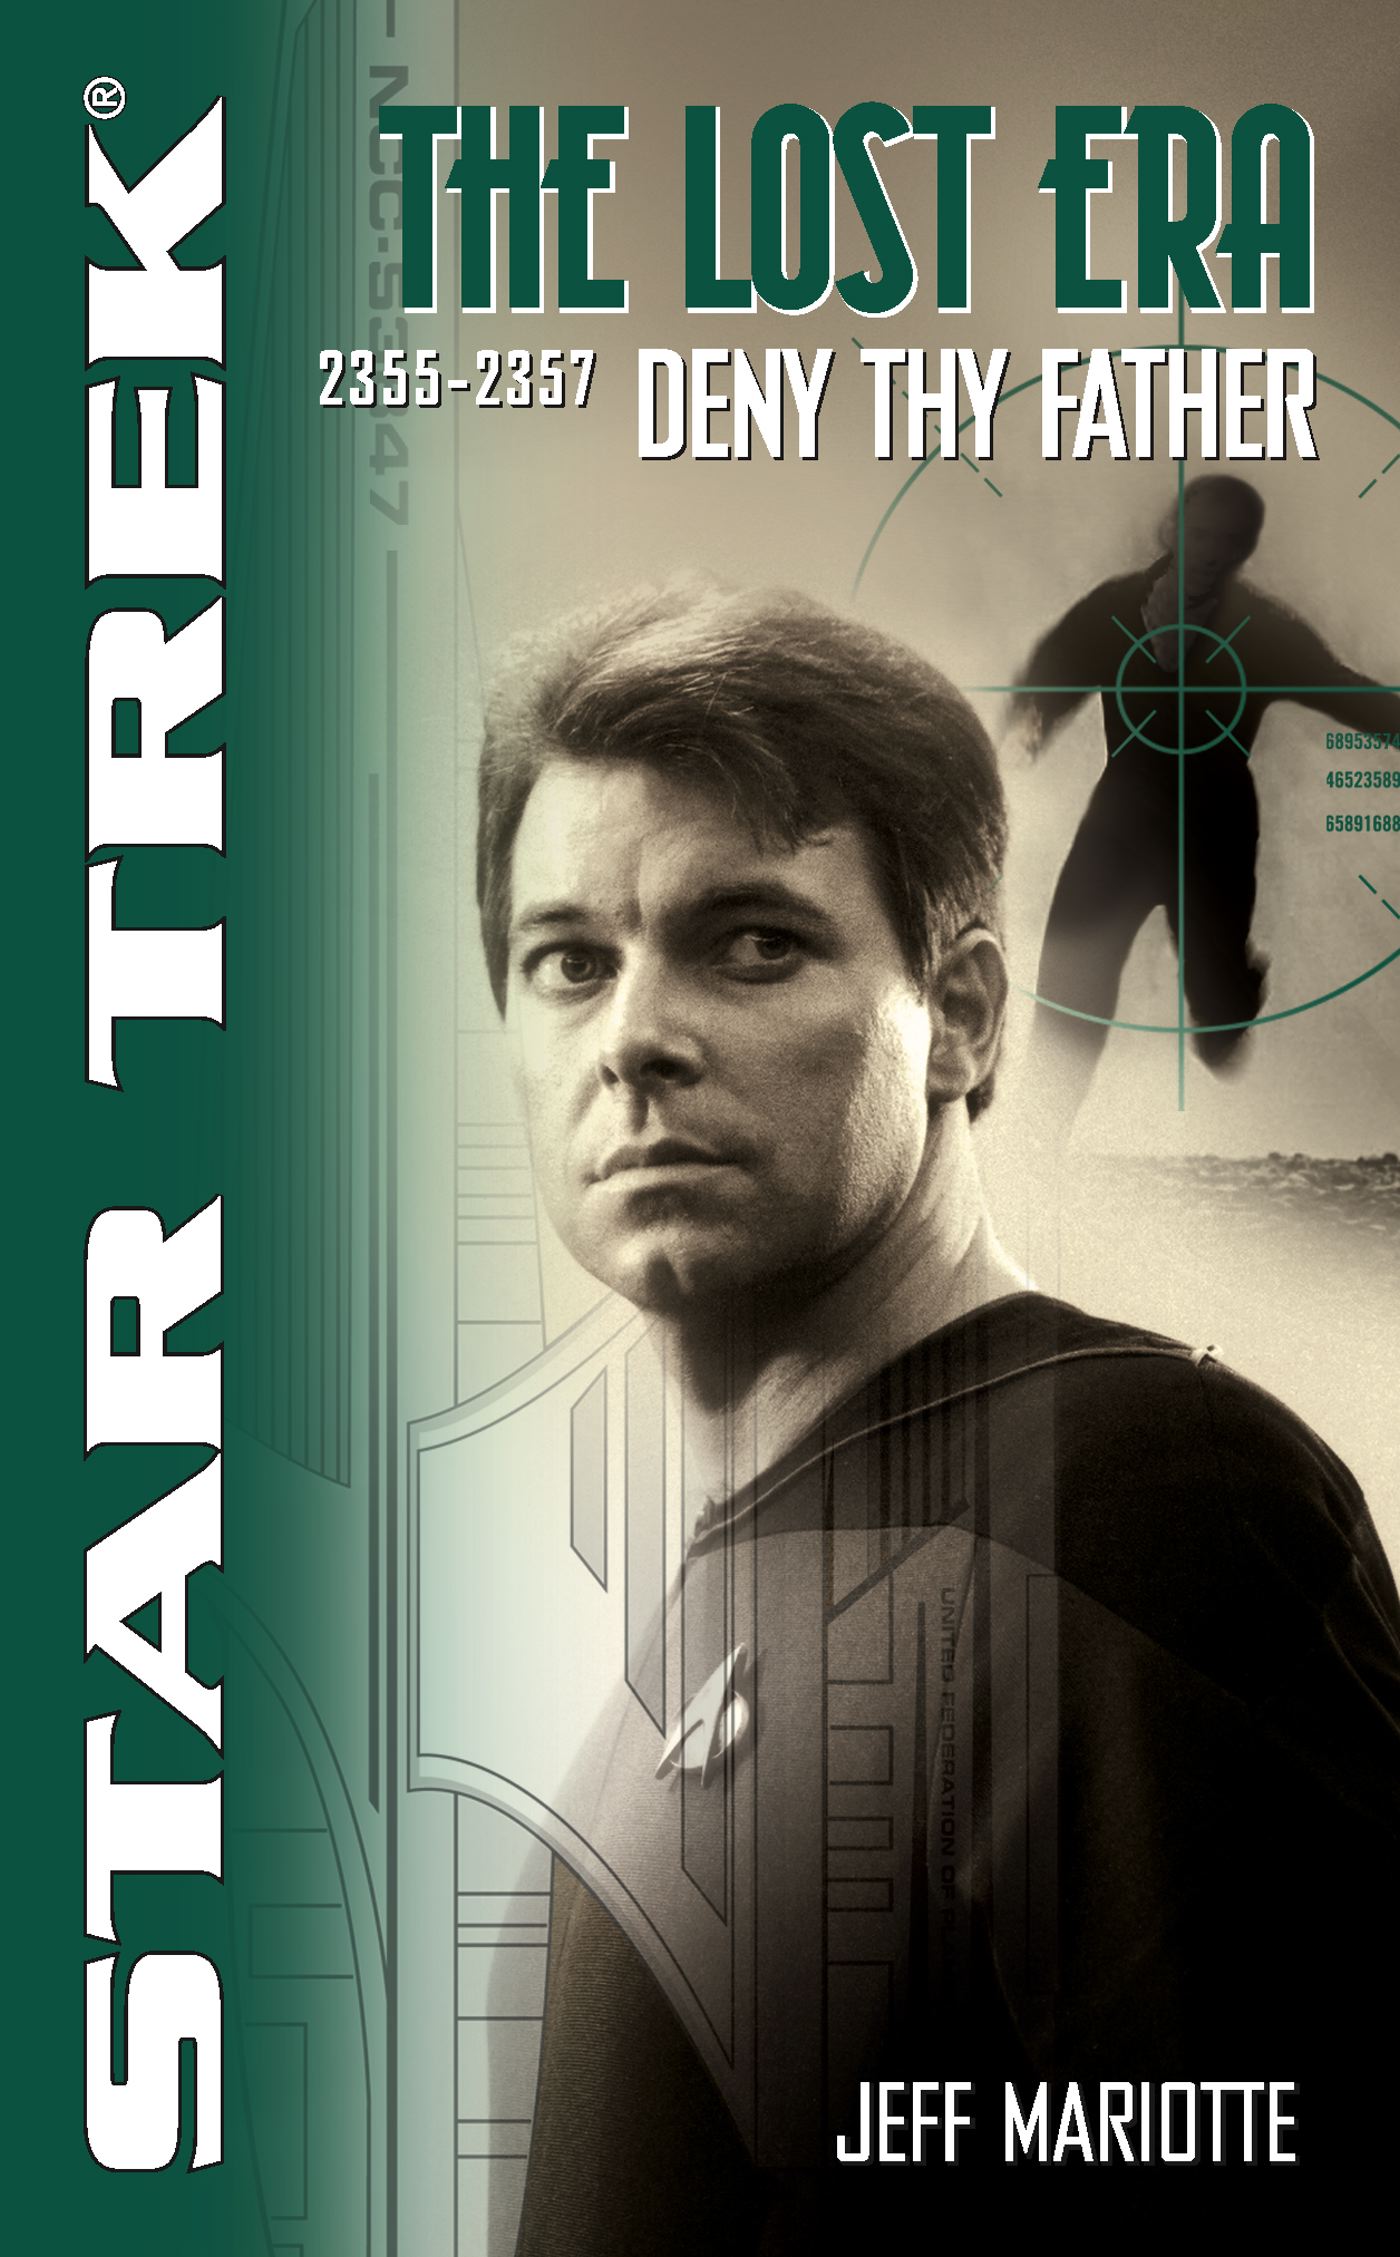 “Star Trek: The Lost Era: Deny Thy Father” Review by Treklit.com